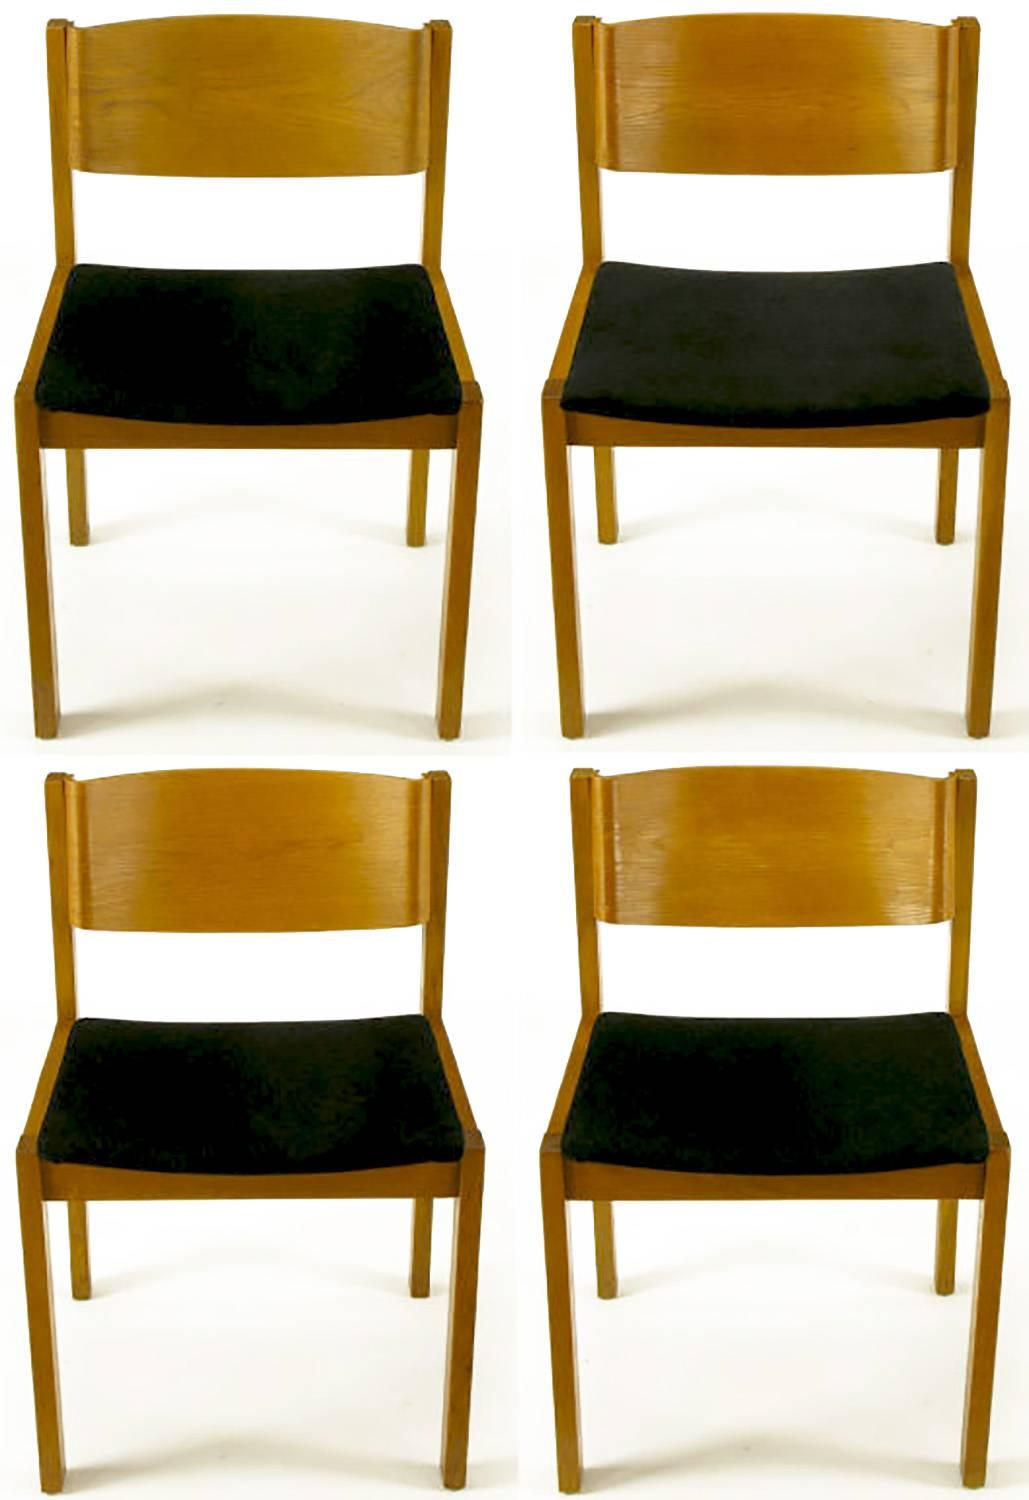 Set of four bleached mahogany frame and bent plywood back dining chairs with new textured black chenille upholstery. Made in West Germany and sold through Harvey Probber, Fall River Mass.